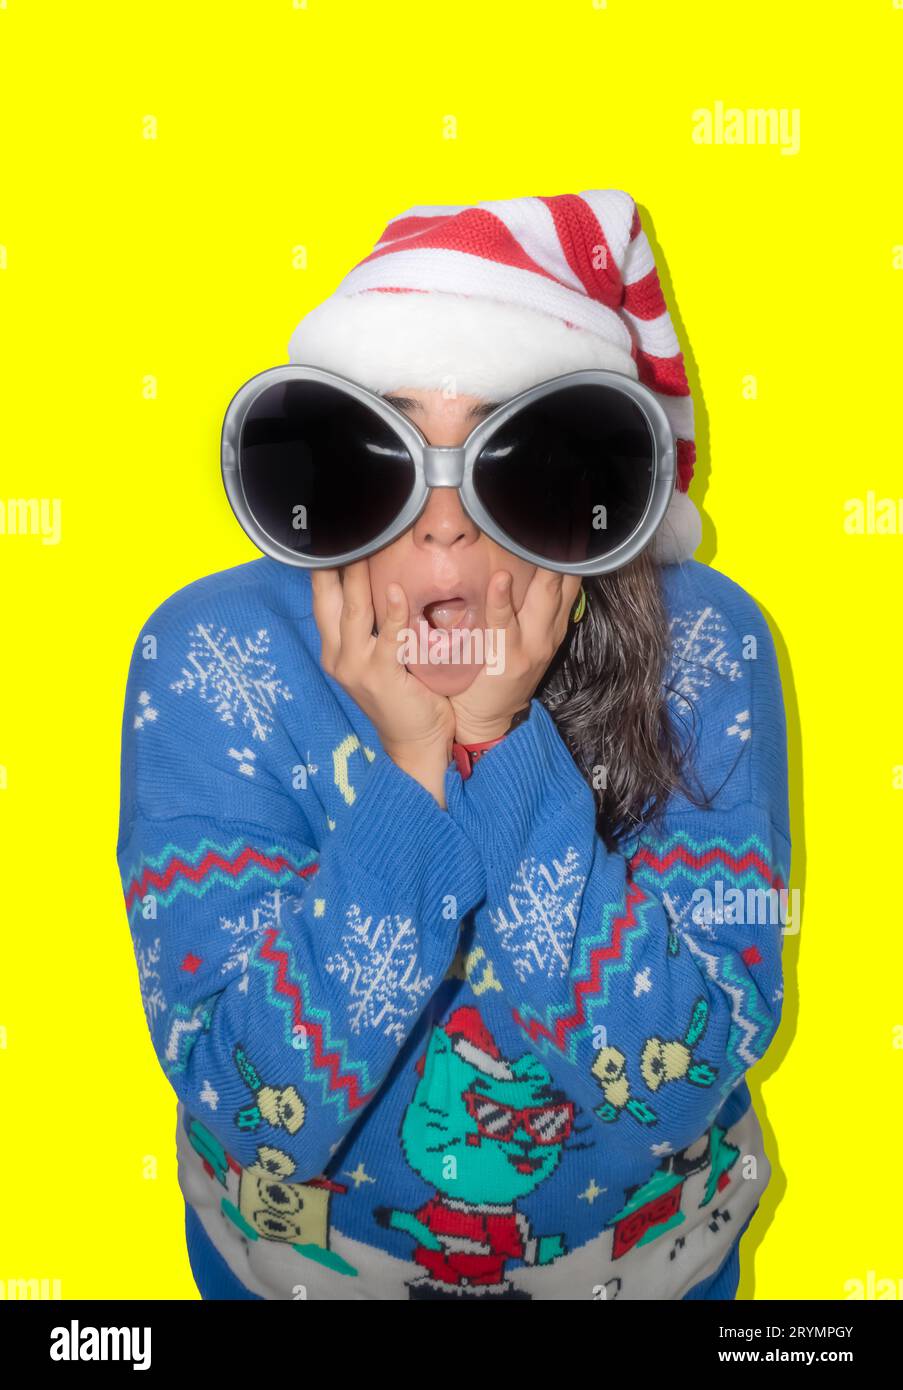 Woman with long hair, makes a surprised gesture to the camera. The woman is dressed in a blue ugly sweater, a Christmas hat, and large glasses. Studio Stock Photo